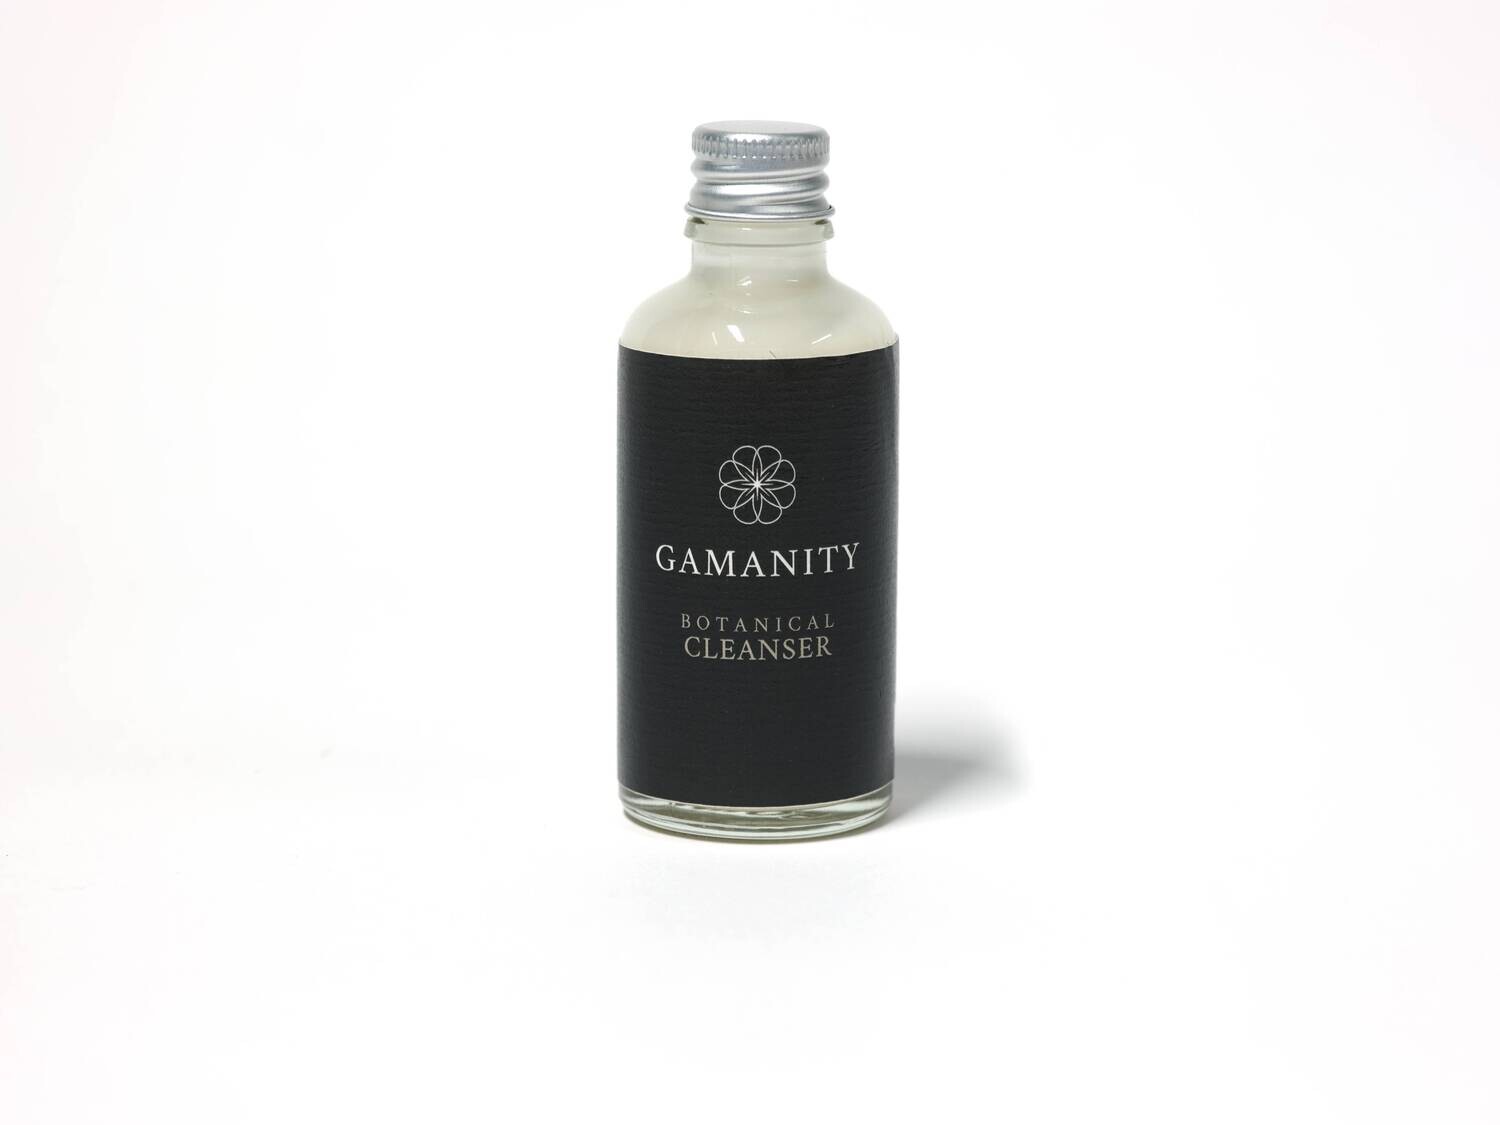 Natural cleanser from Gamanity